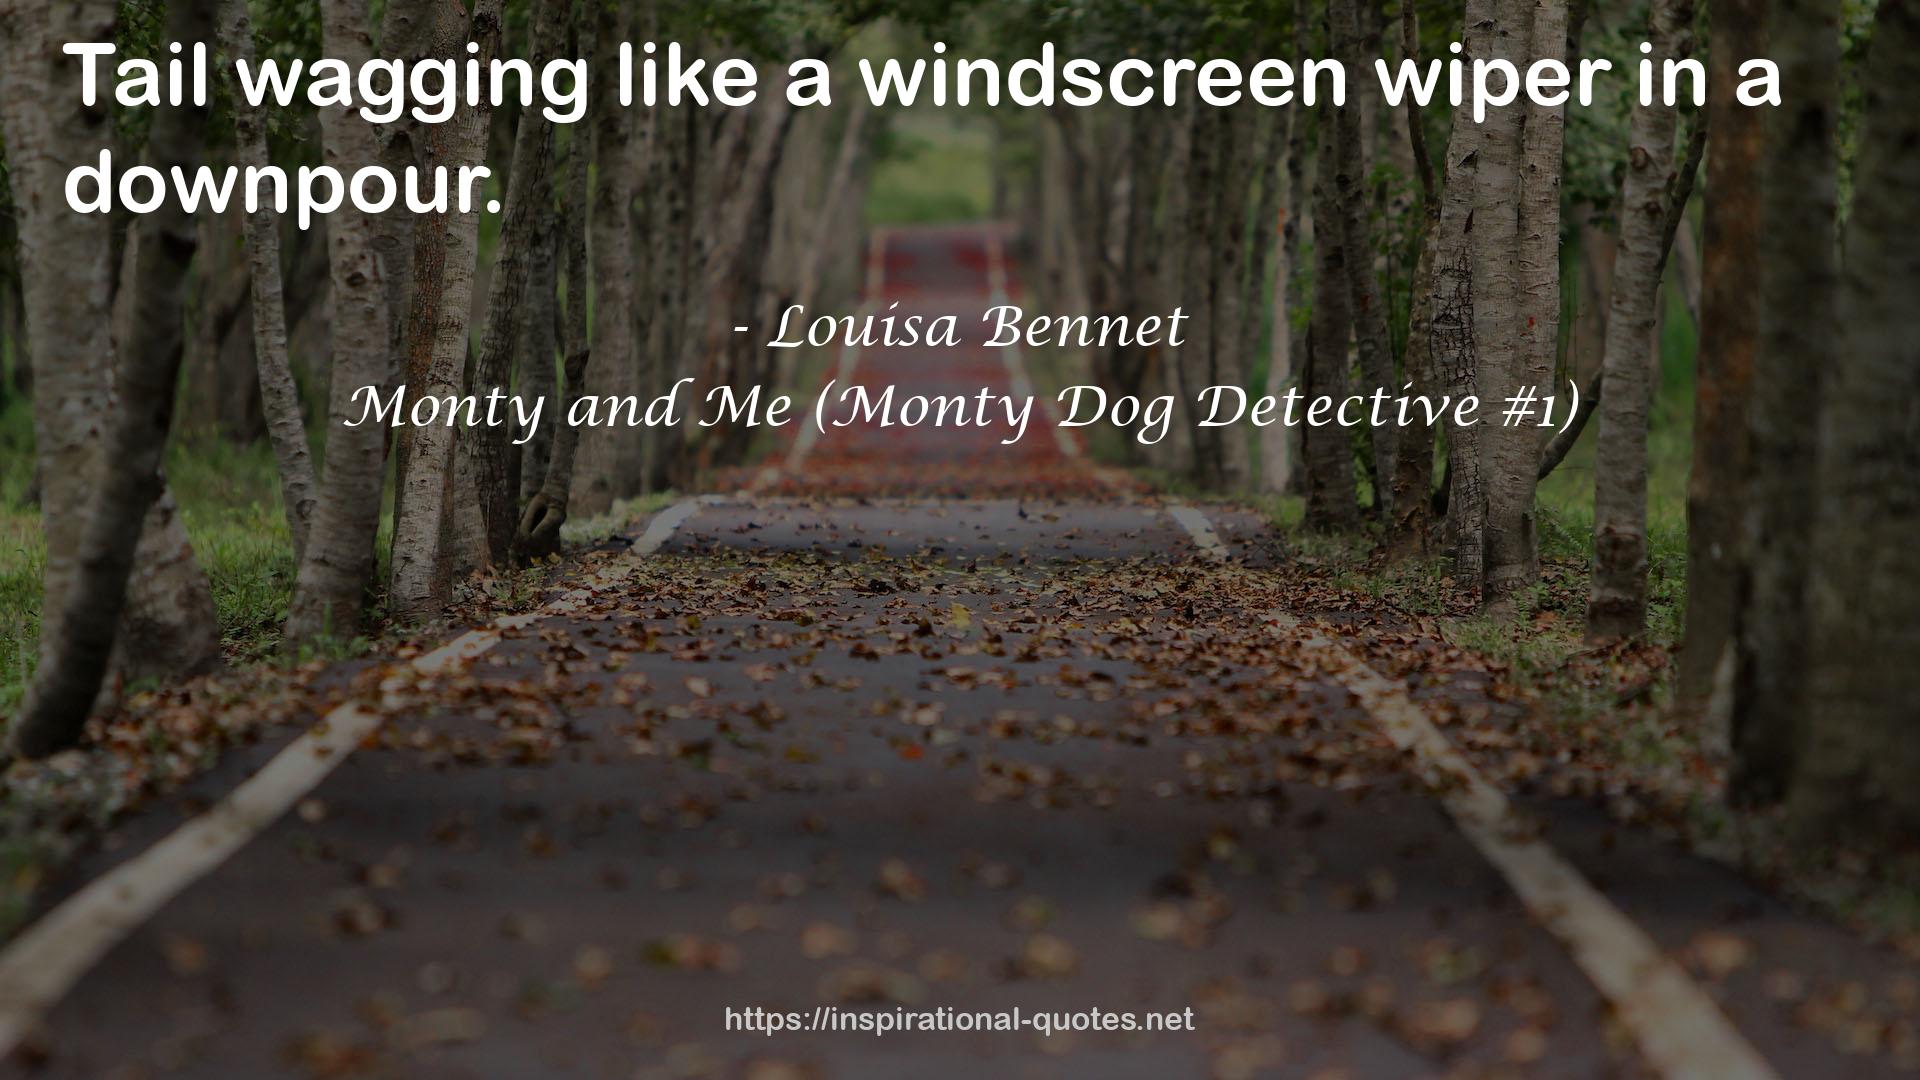 Monty and Me (Monty Dog Detective #1) QUOTES